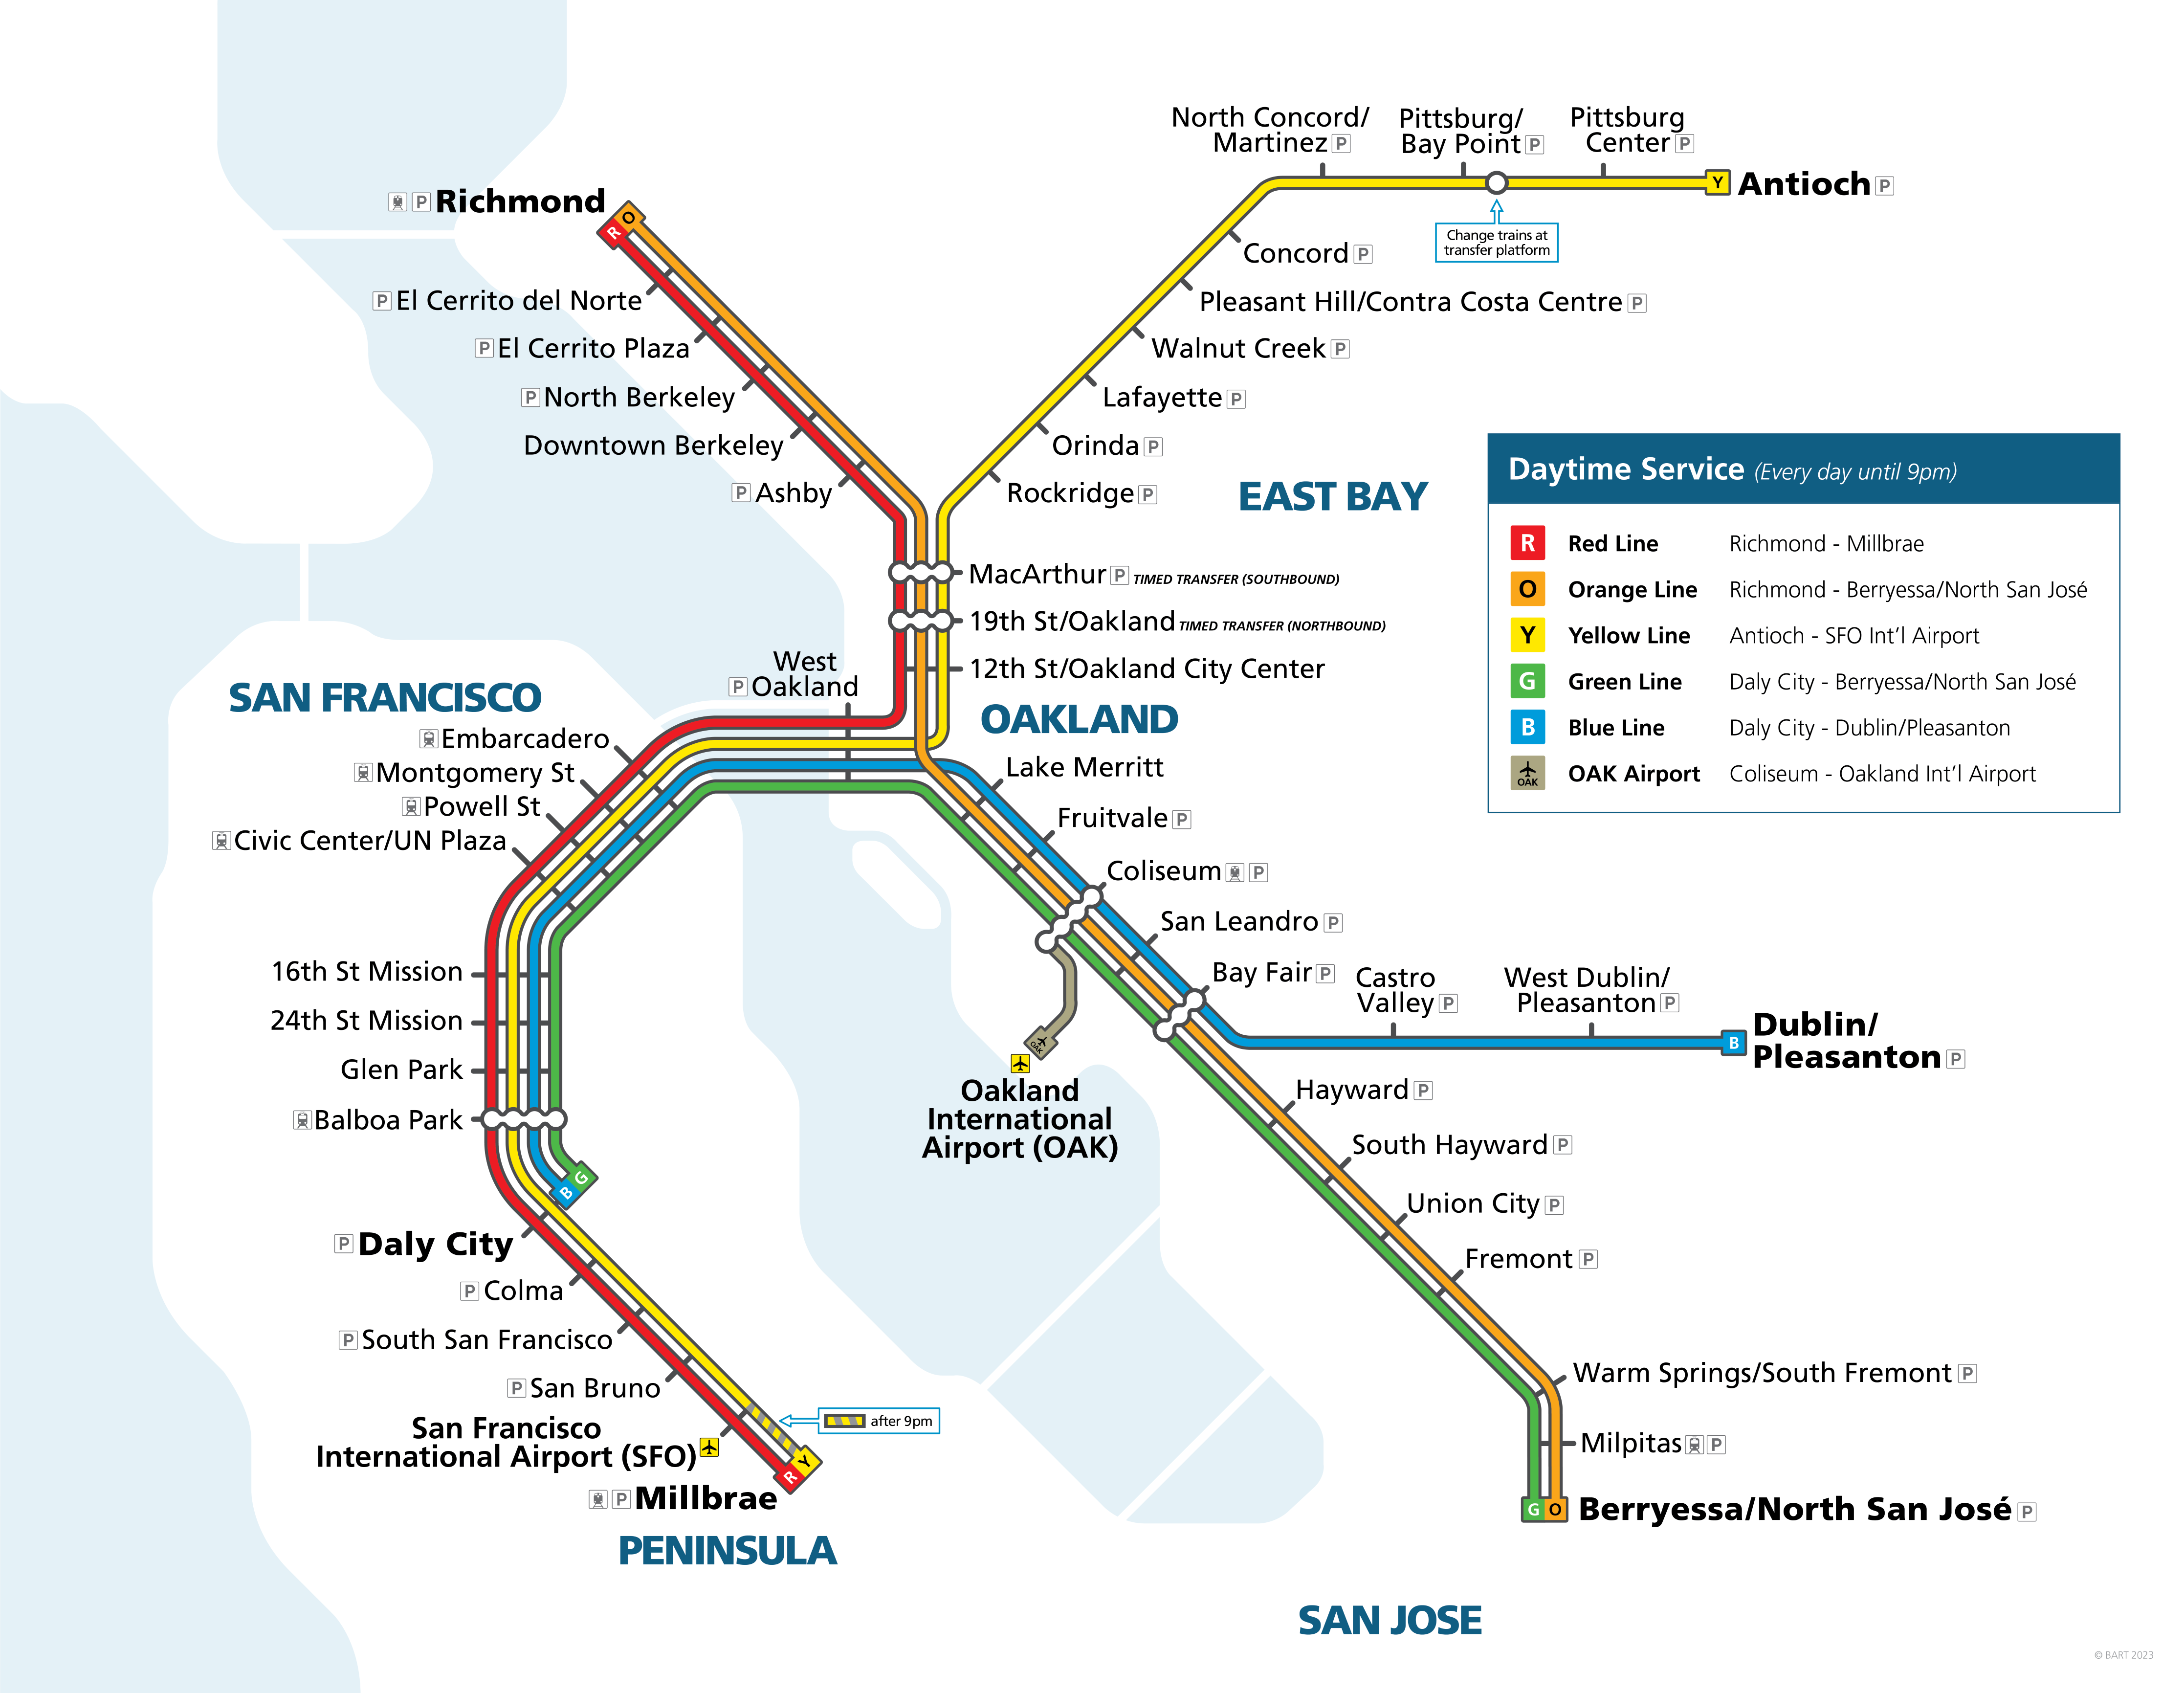 System Map - Every day until 9pm 5-Line Service